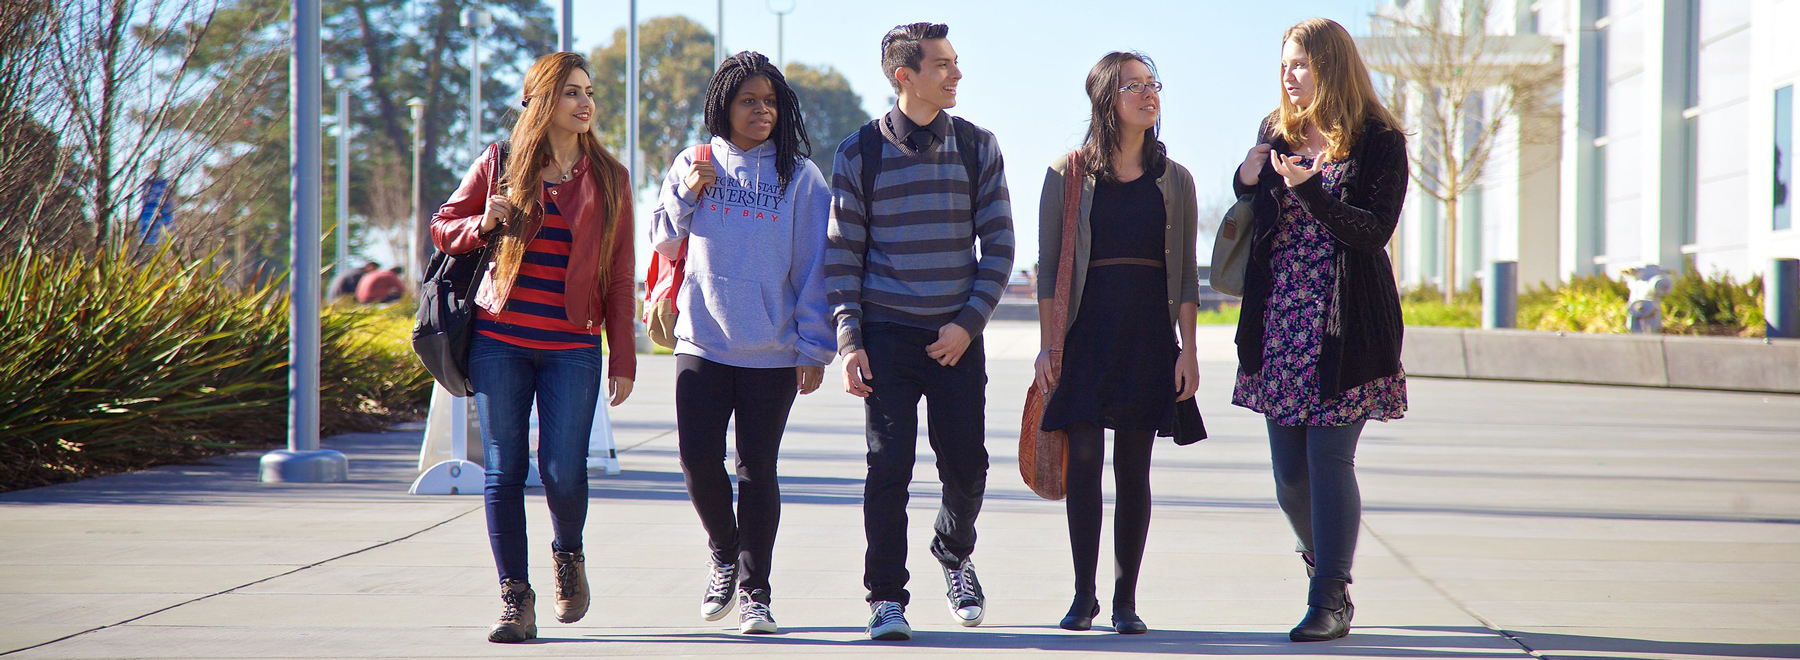 Five students walking on campus